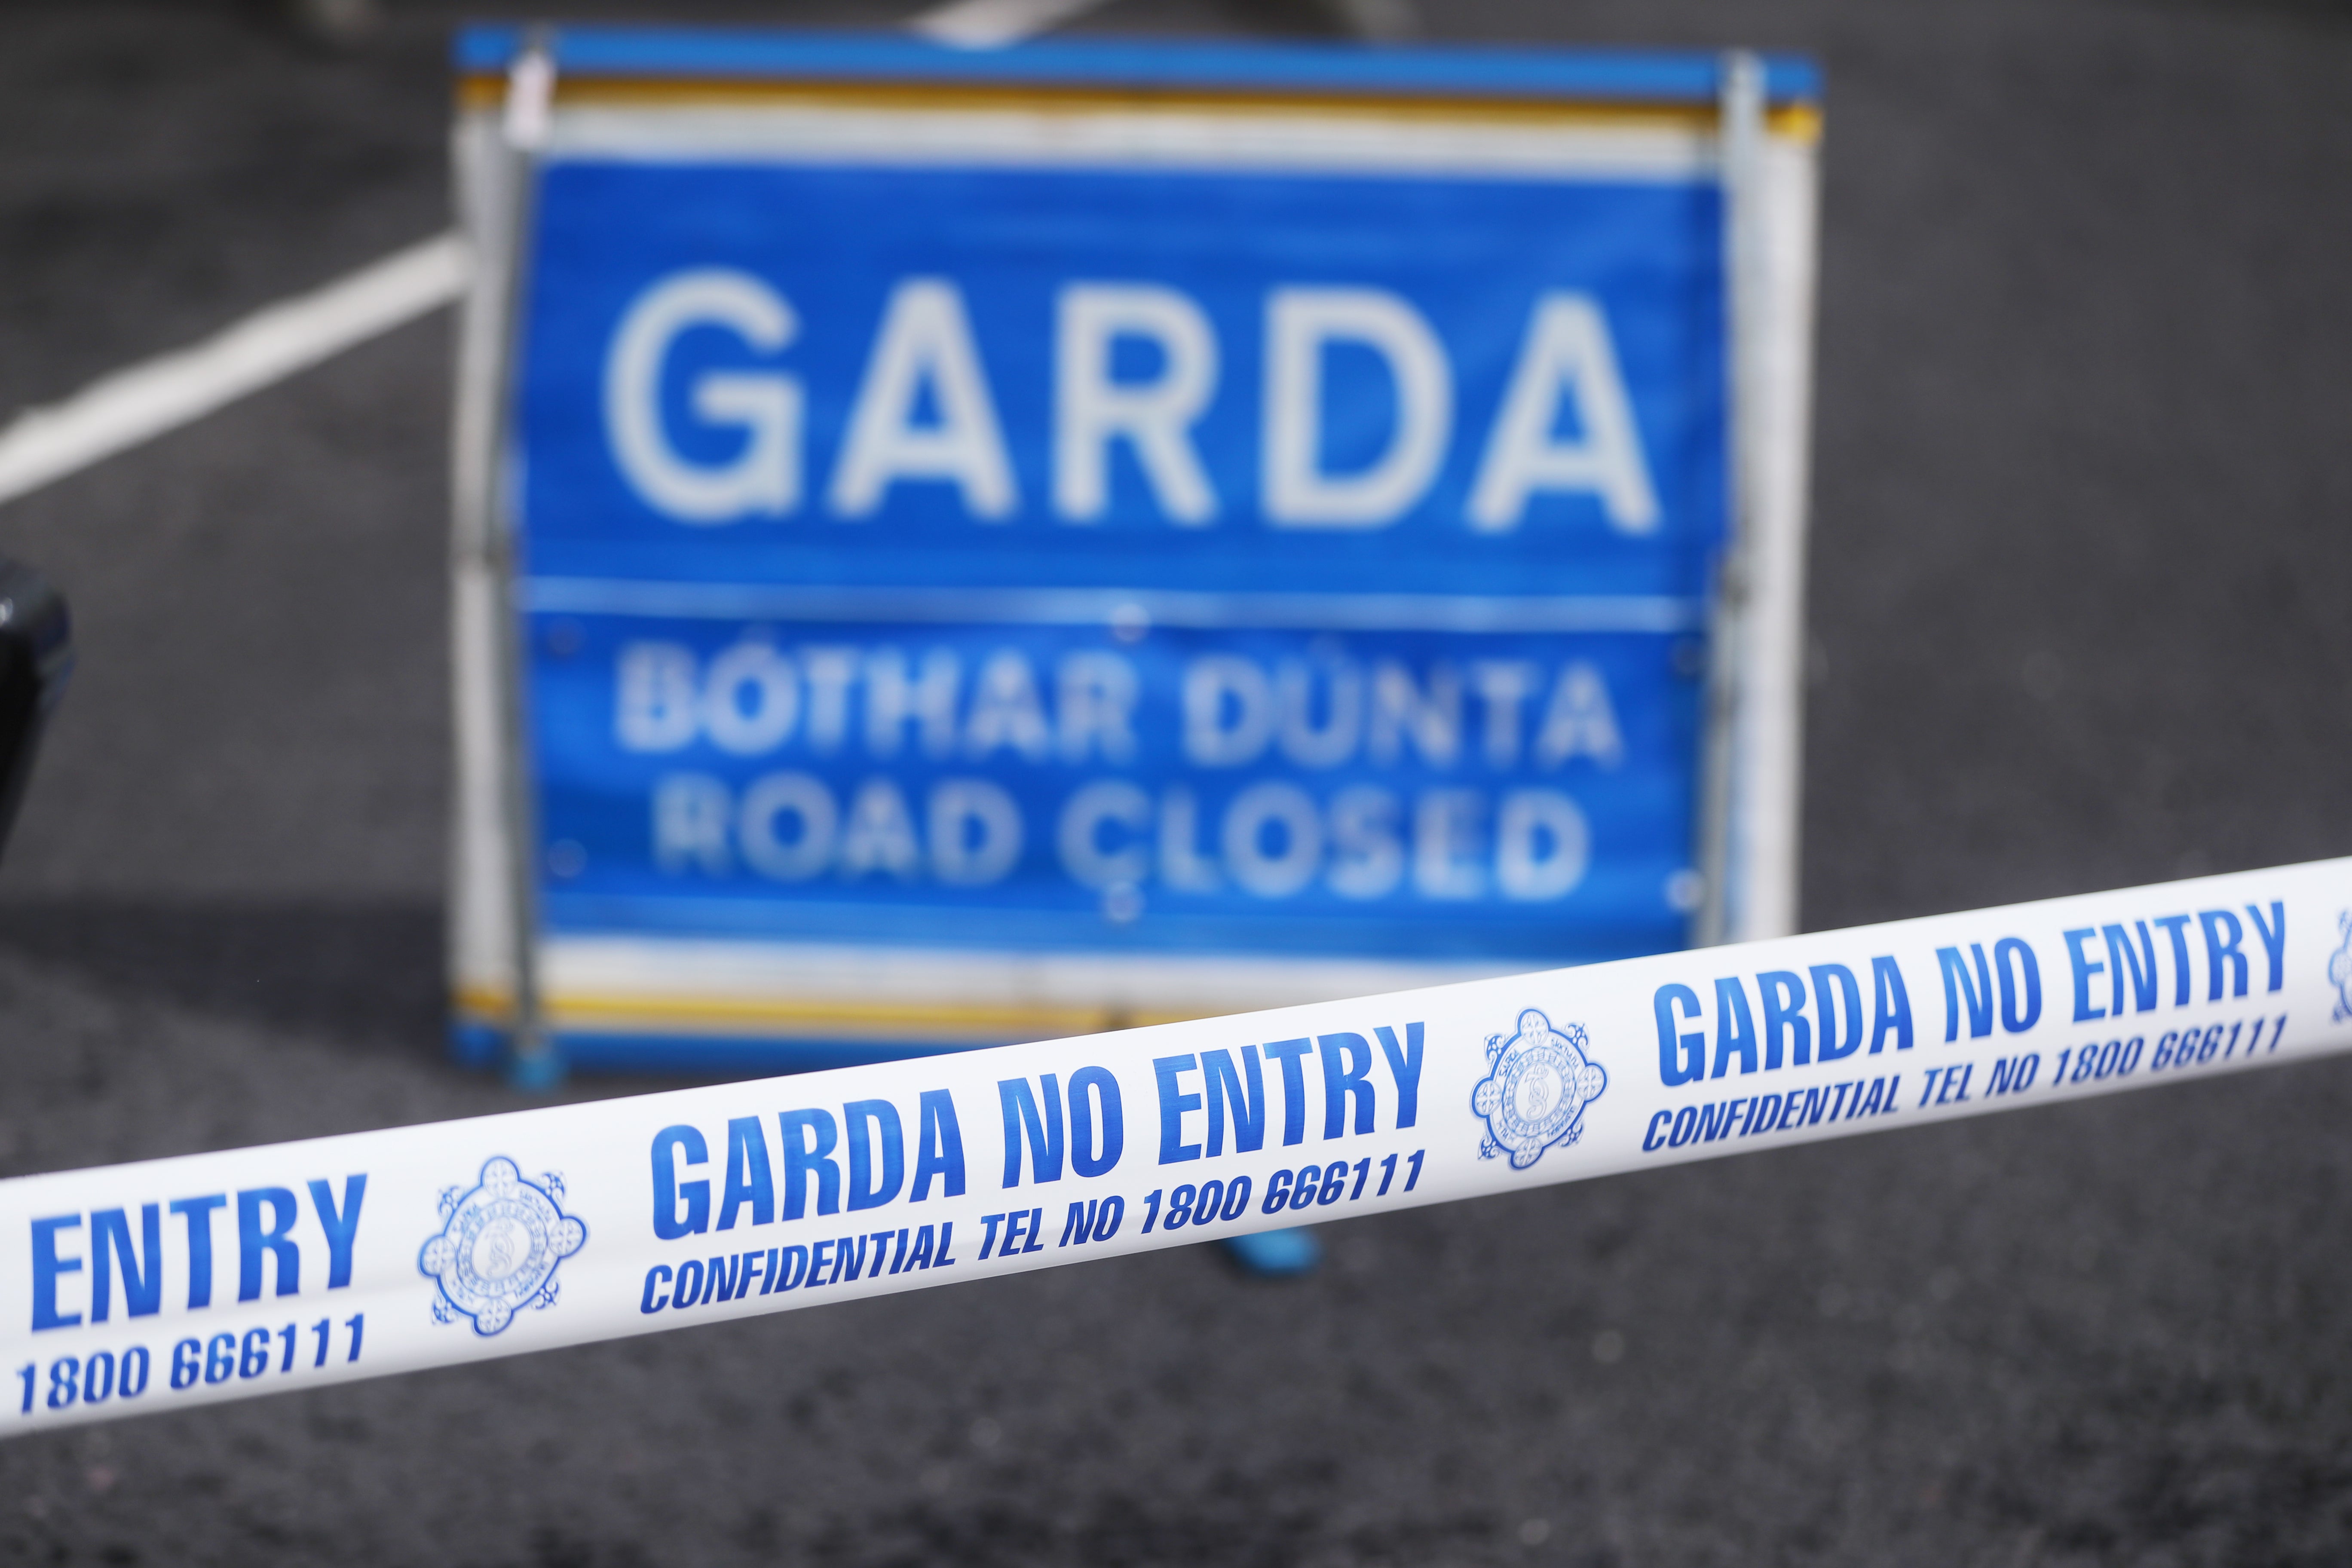 A woman has died after she was hit by a truck in south Dublin, gardai have said (PA)